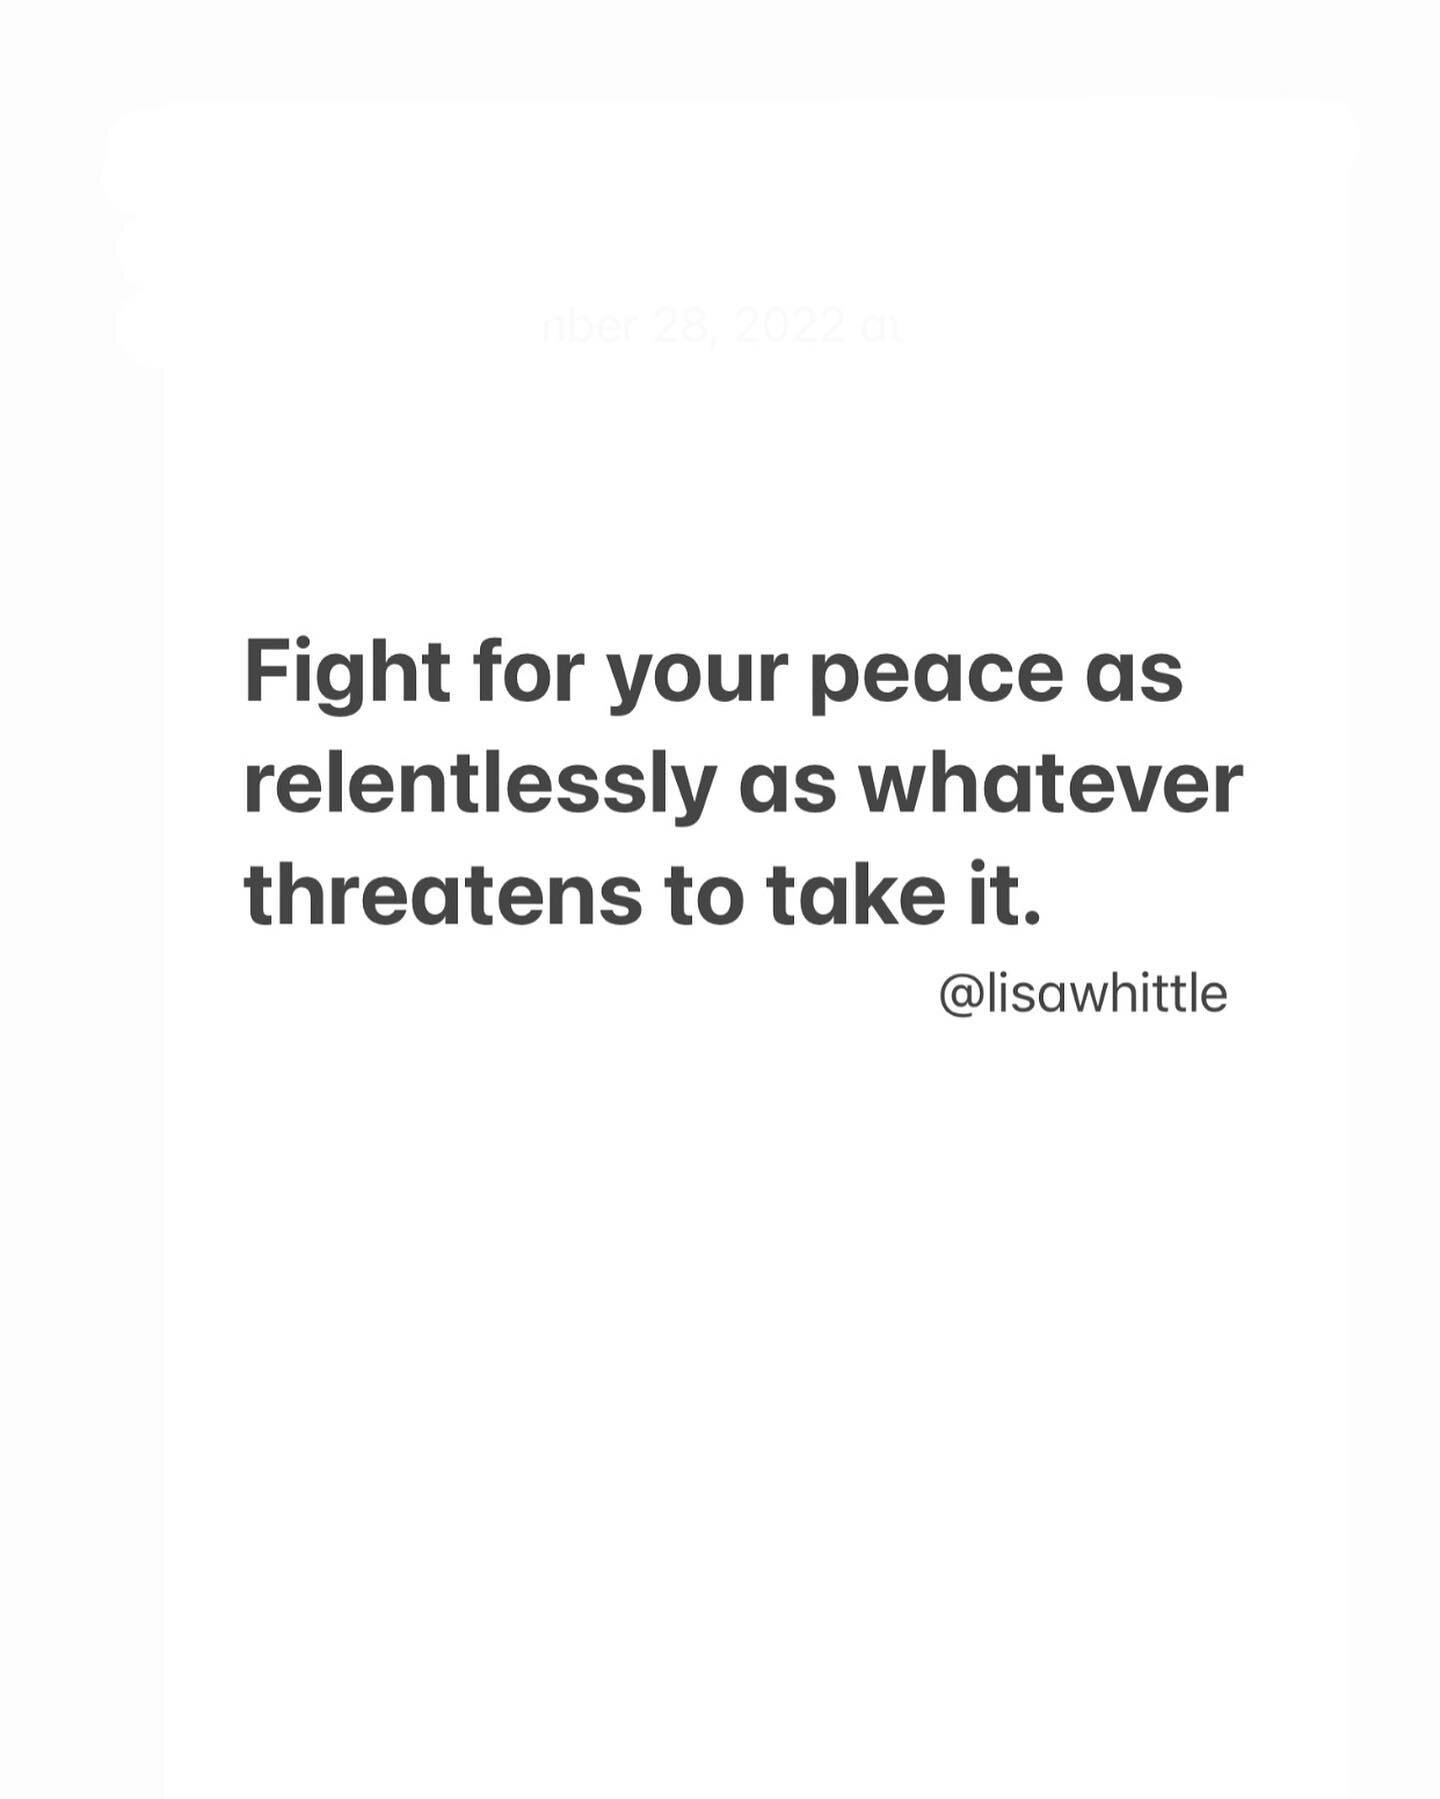 You feel that (what often seems like a relentless) struggle for your personal peace, right? 

Every day things battle us for it. Our overwork, our mismanaged relationships, the world and it&rsquo;s bad news&hellip;it all tries to take peace from us. 